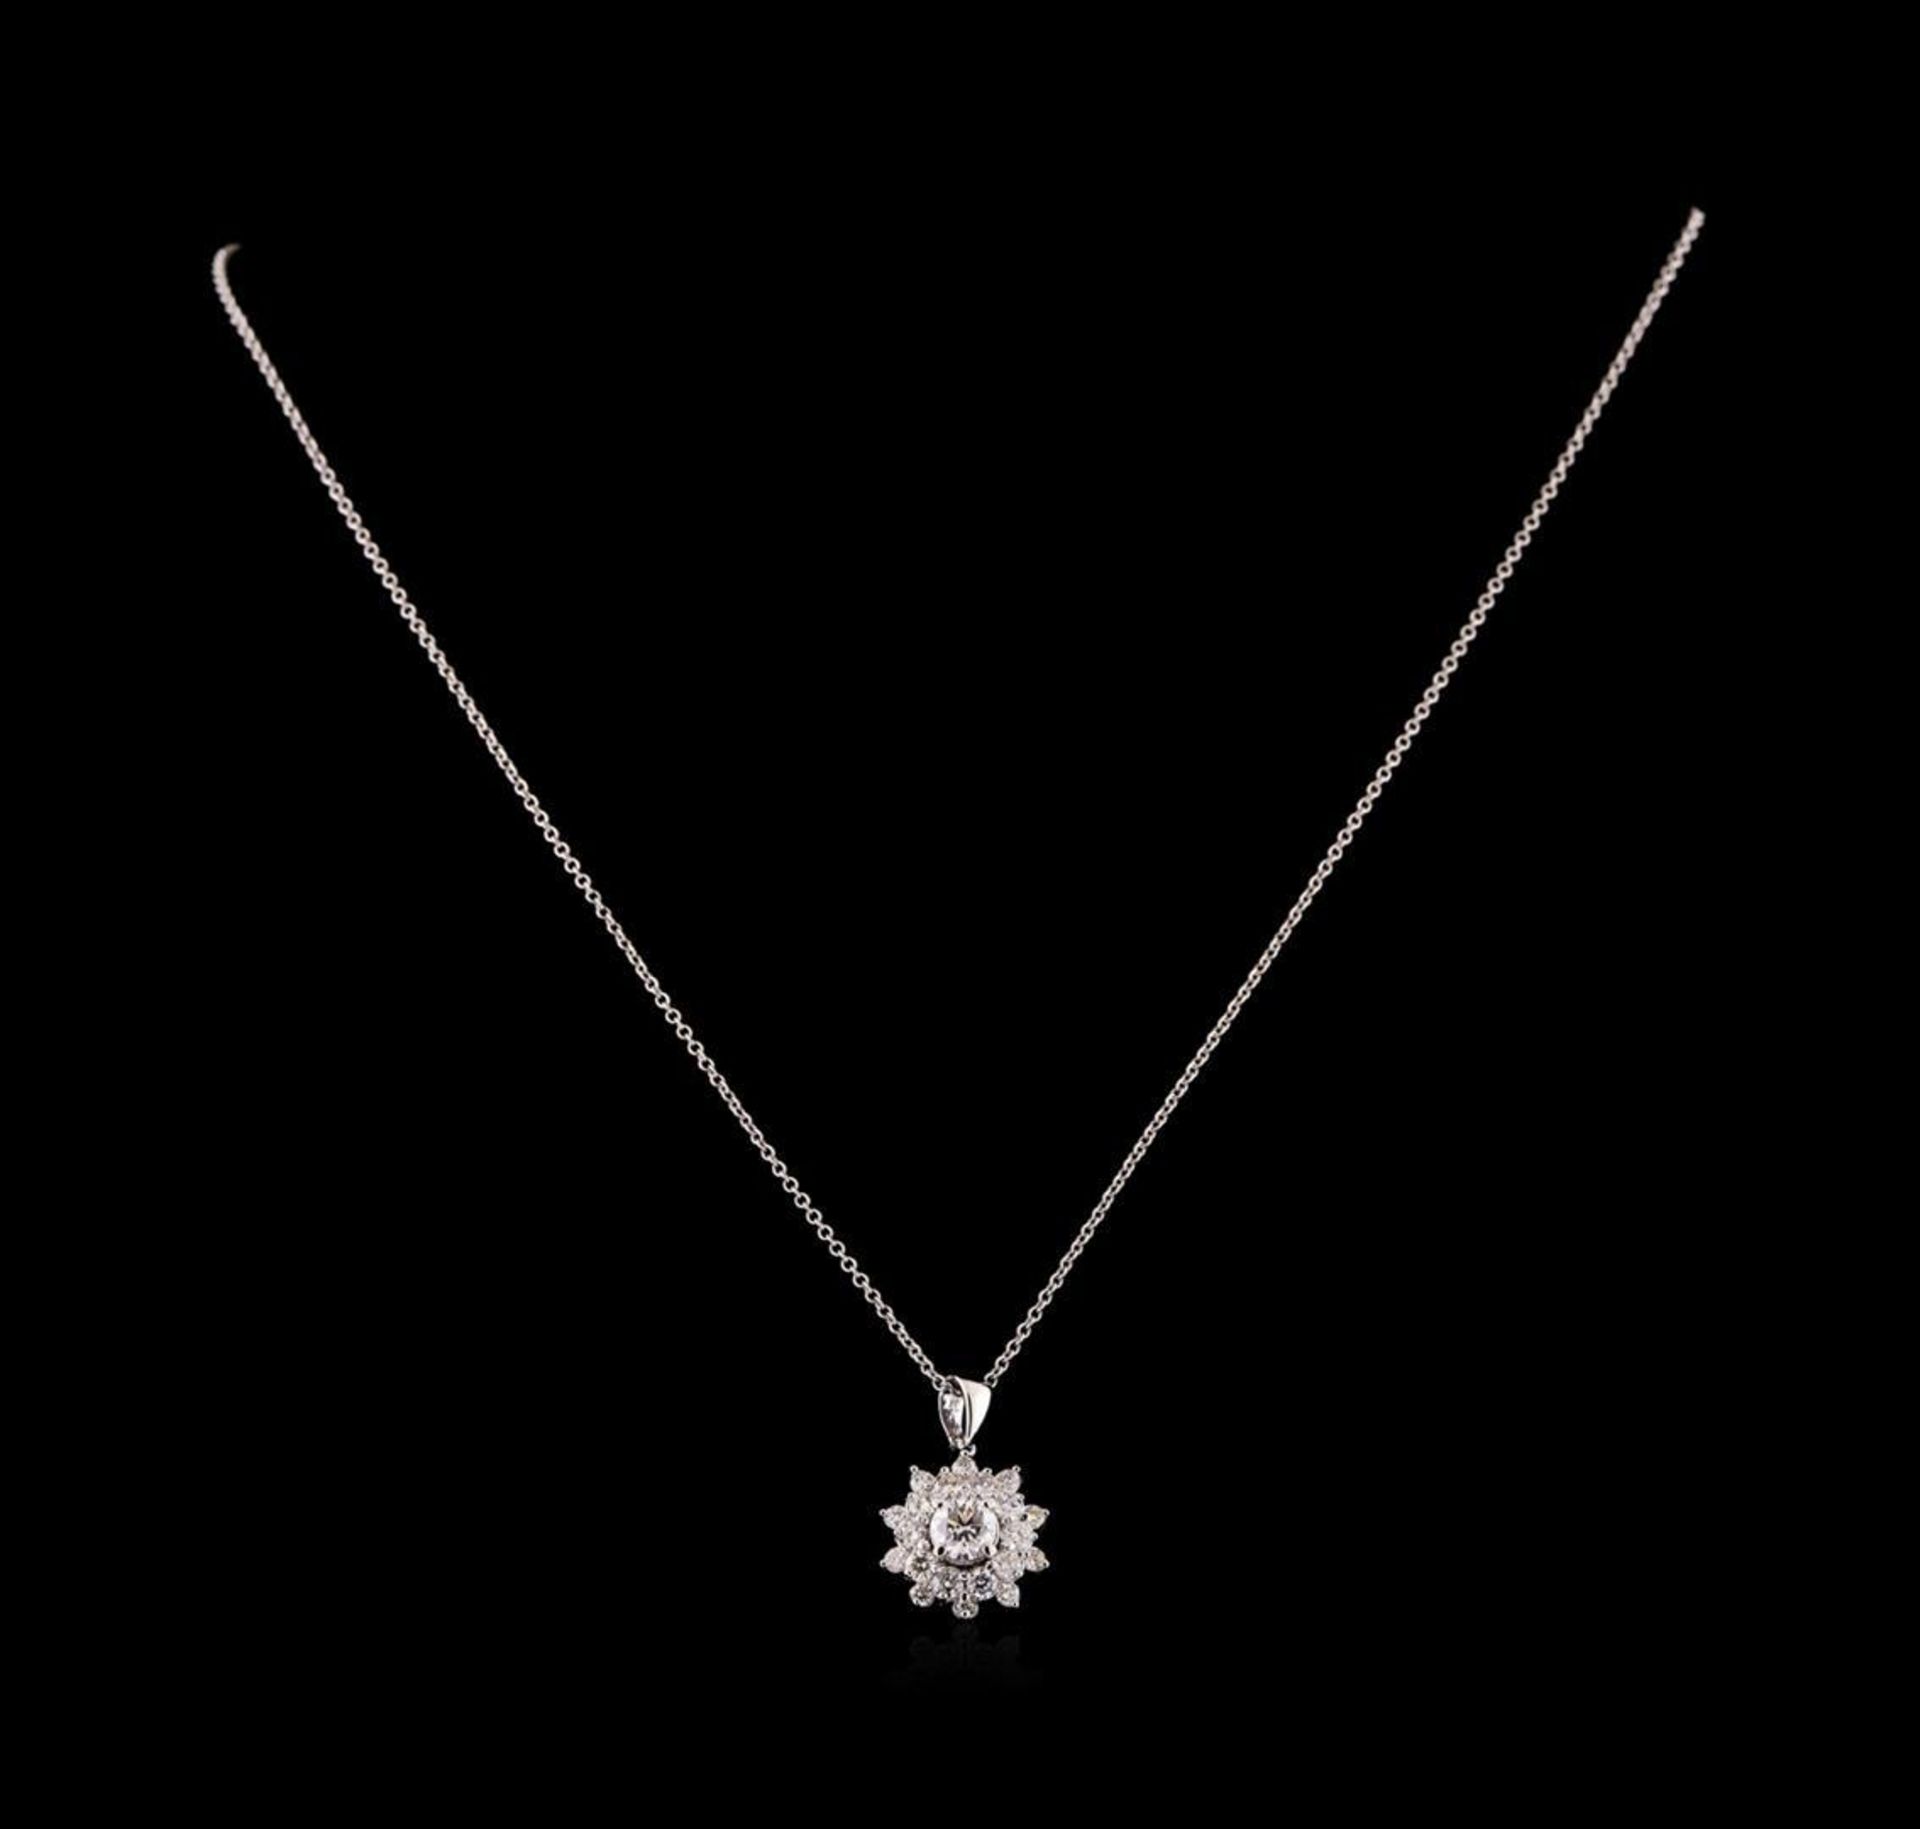 1.27 ctw Diamond Pendant With Chain - 14KT White Gold - Image 2 of 3